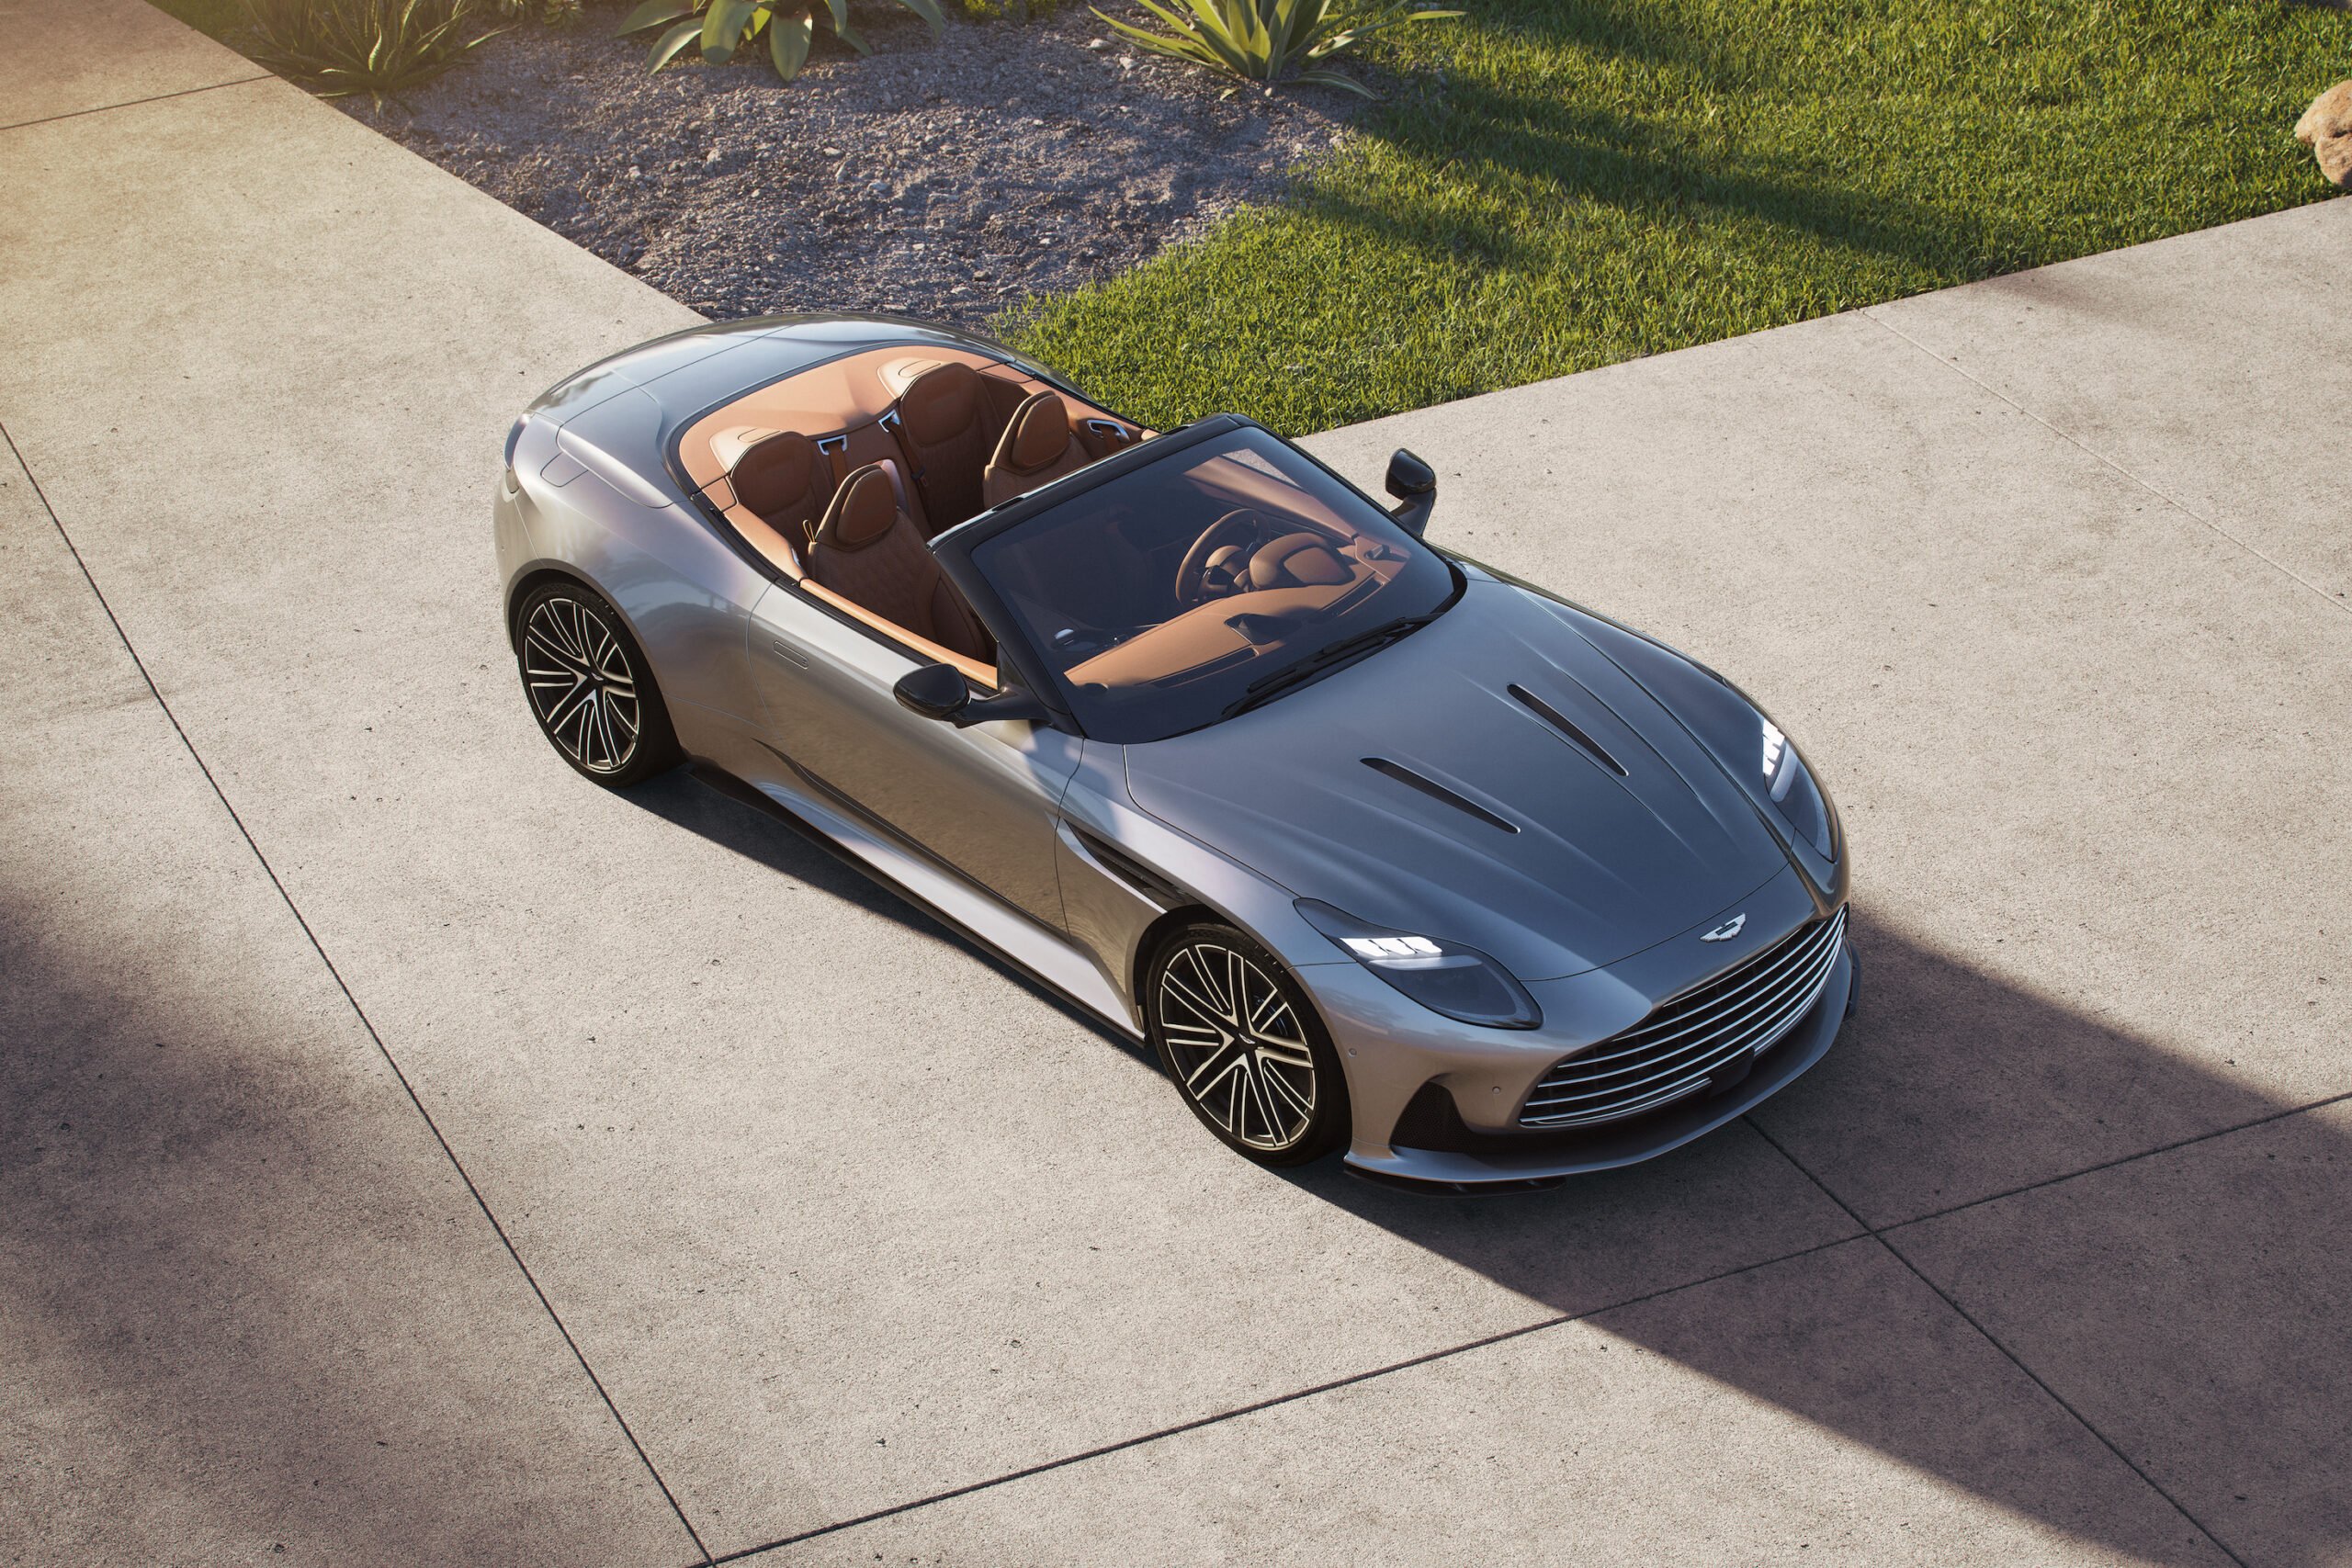 Introducing DB12 Volante: The ultimate open-top Super Tourer